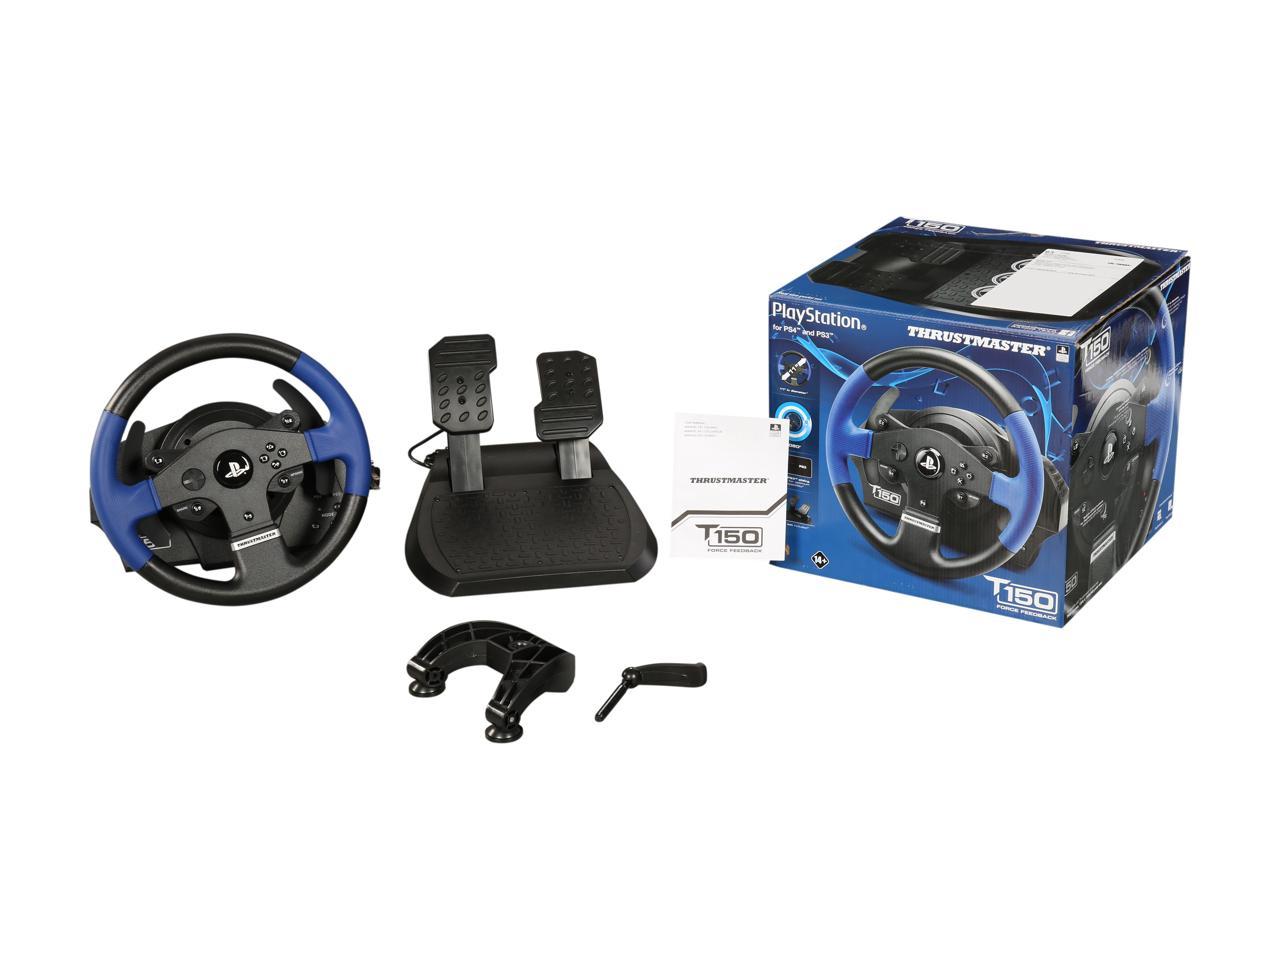 Thrustmaster T150 Rs Force Feedback Racing Wheel (PS5, PS4, PS3, PC)